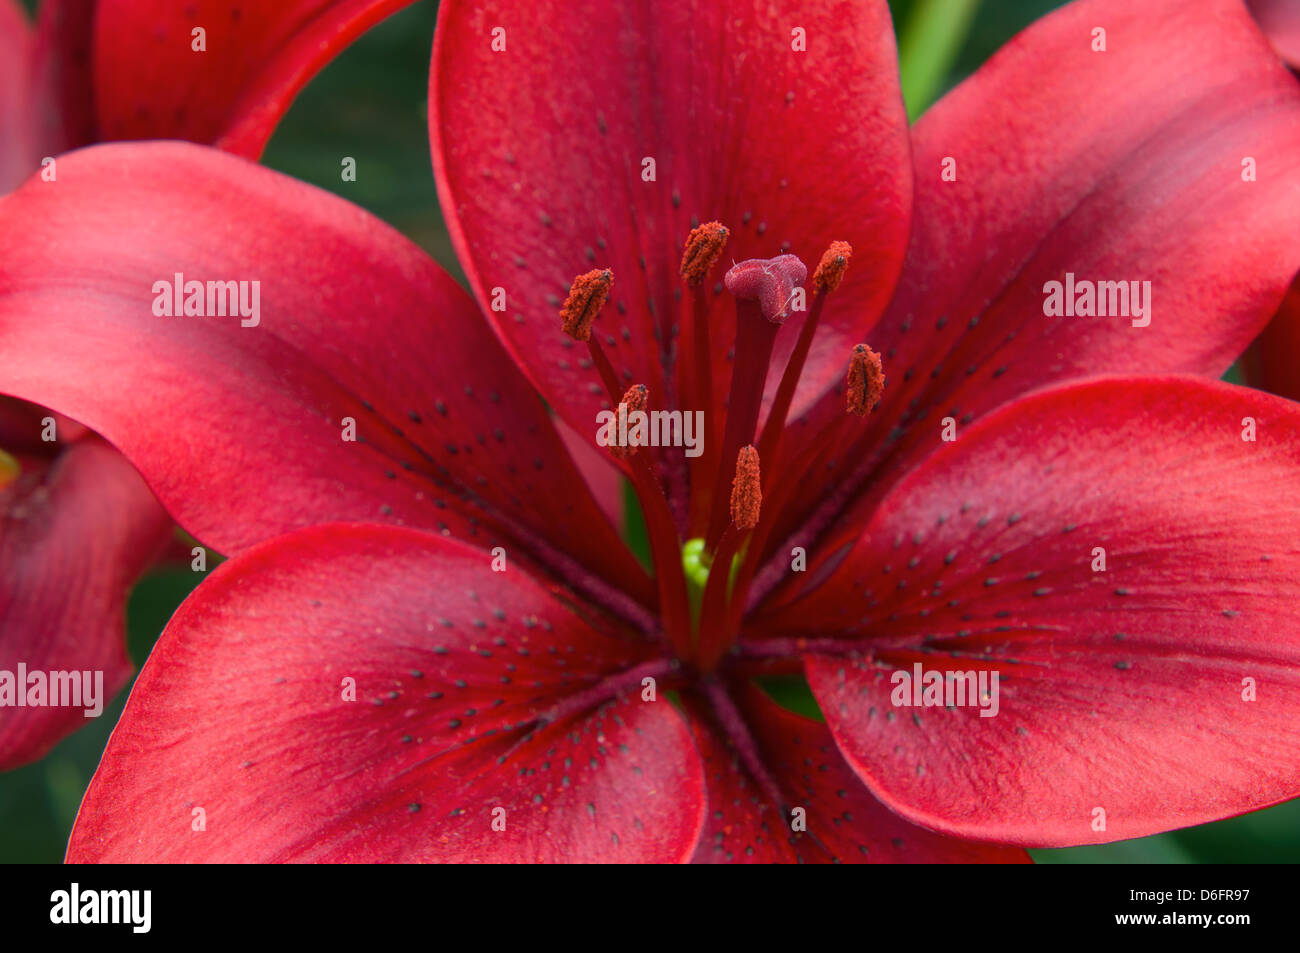 red asiatic lily closeup inside full bloom of petals stigma and stamens Stock Photo